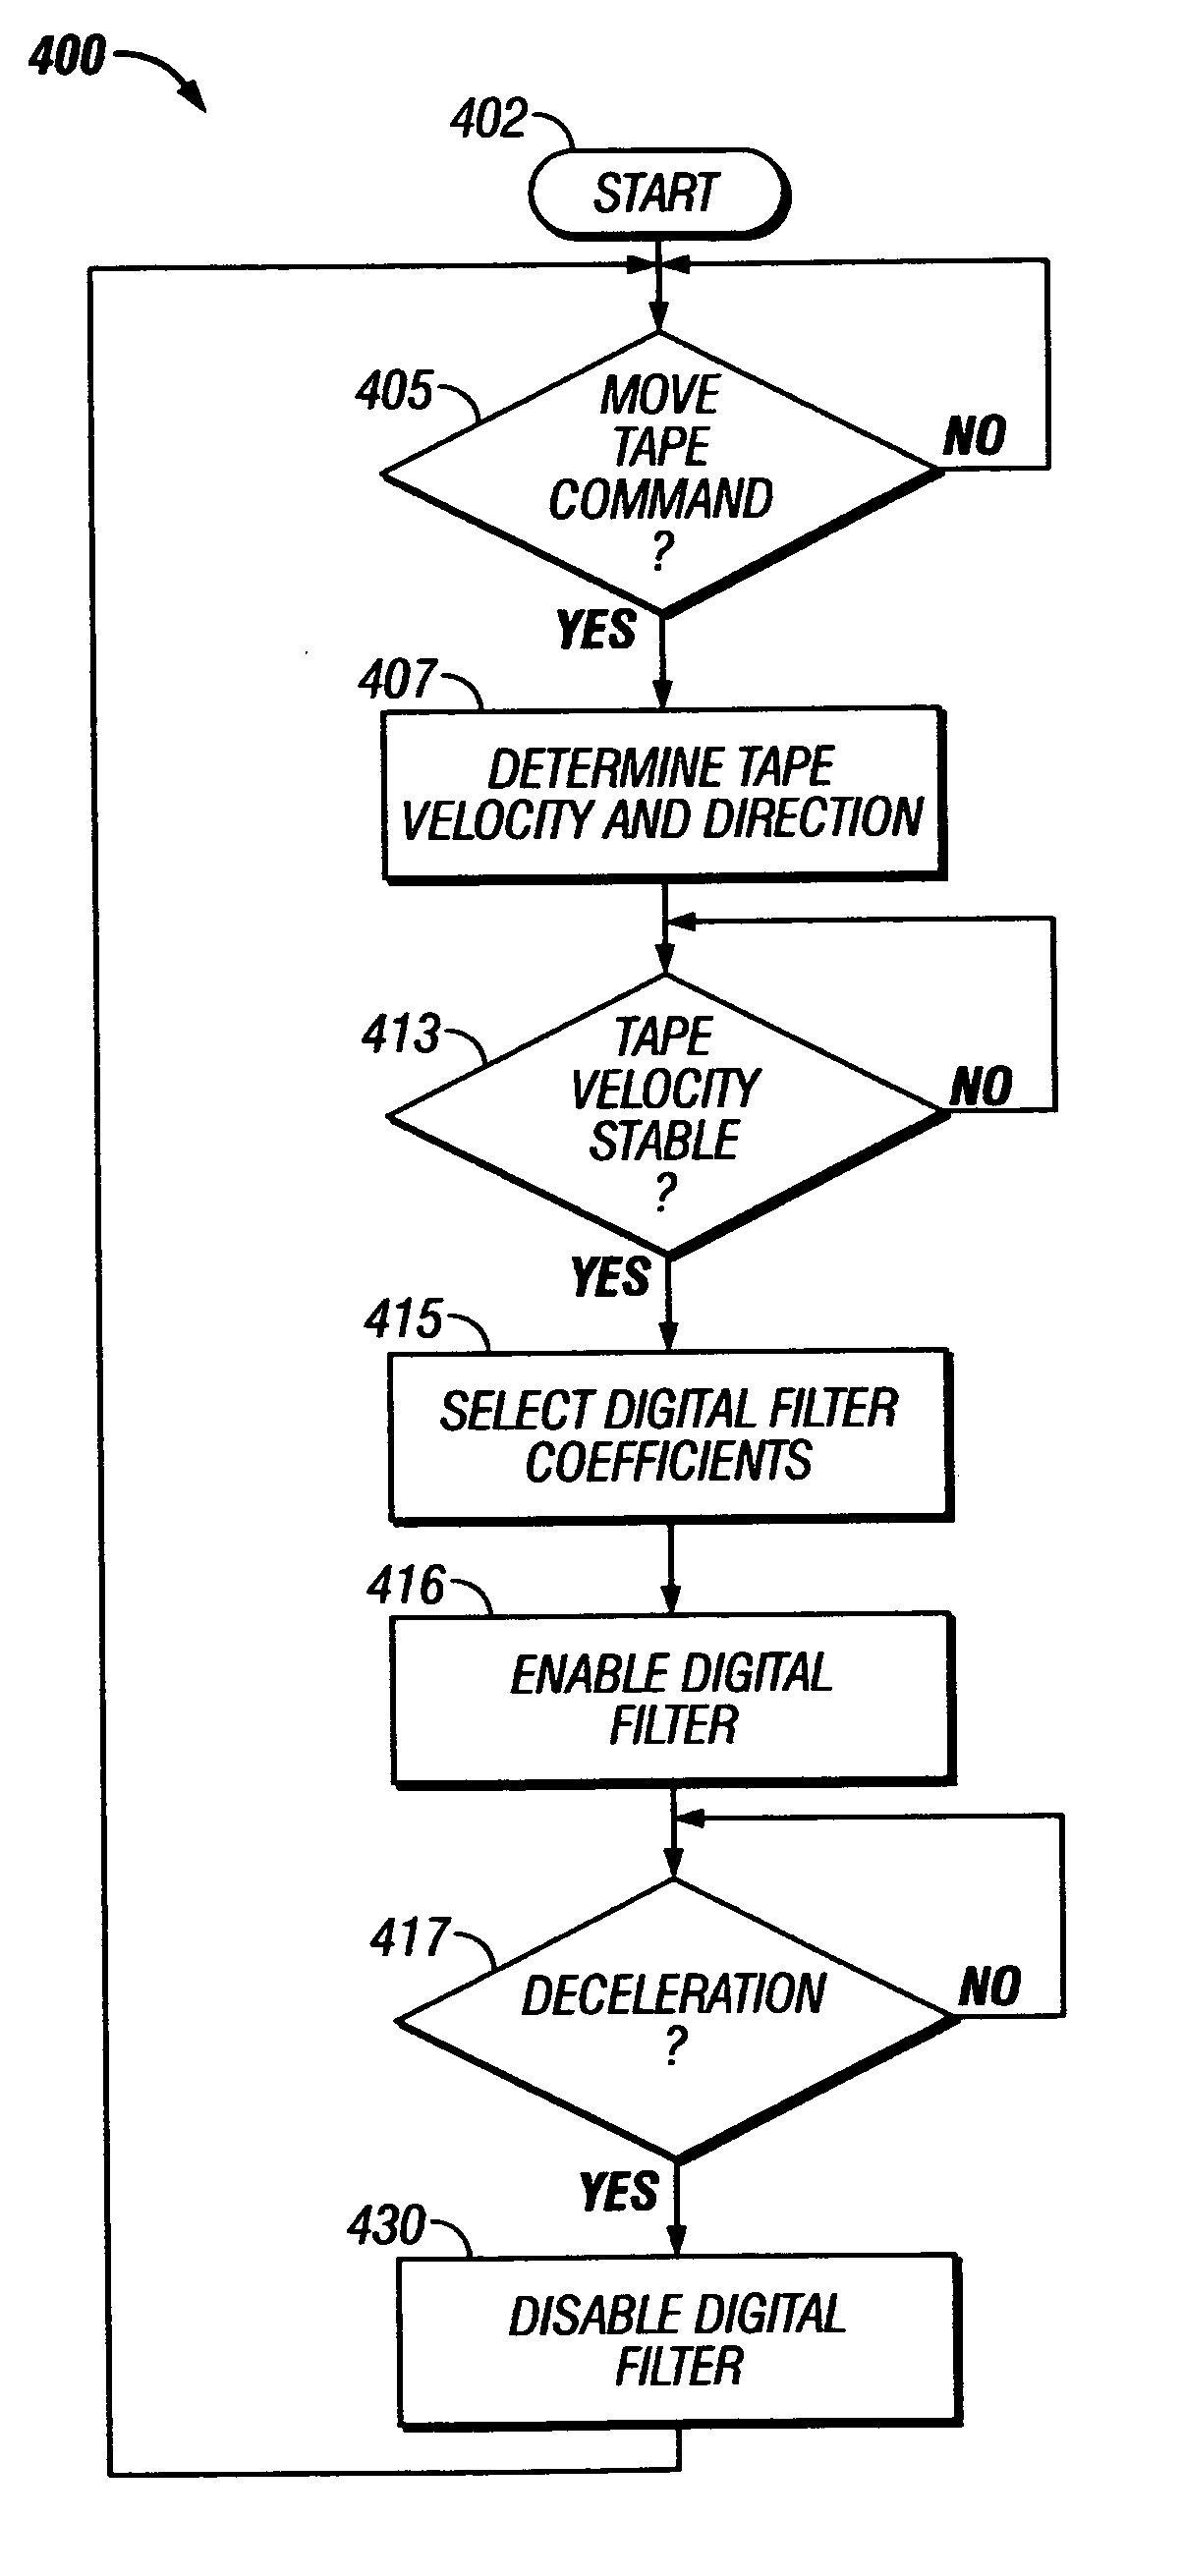 Matched filter detection for time based servo signals in a tape drive